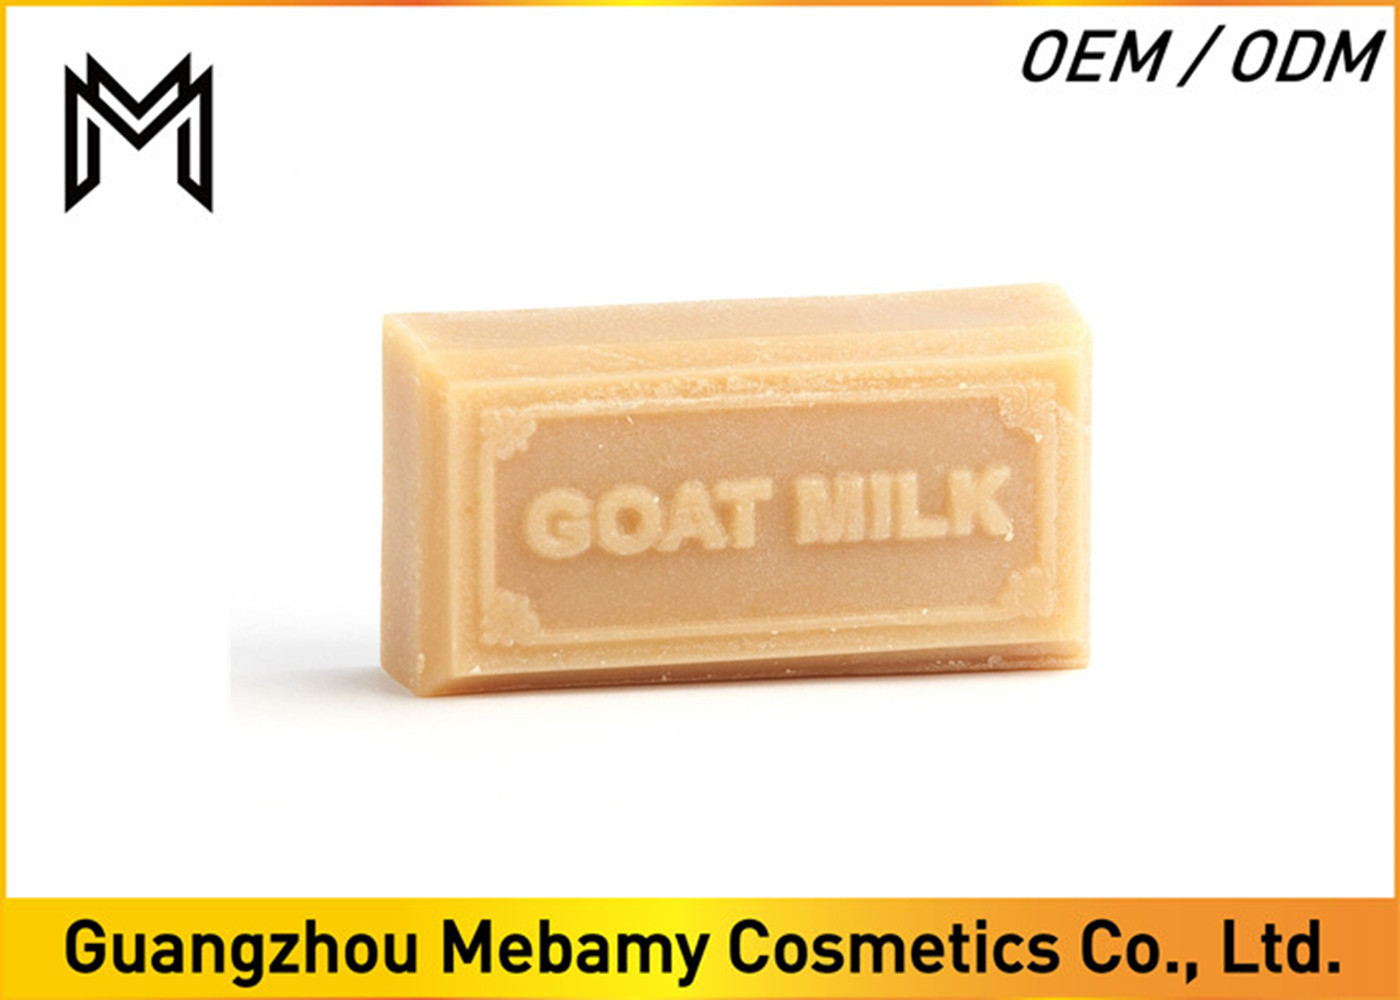 China Sooth Skin Organic Handmade Soap , Authentic Goat Milk Natural Soap For Dry Skin on sale